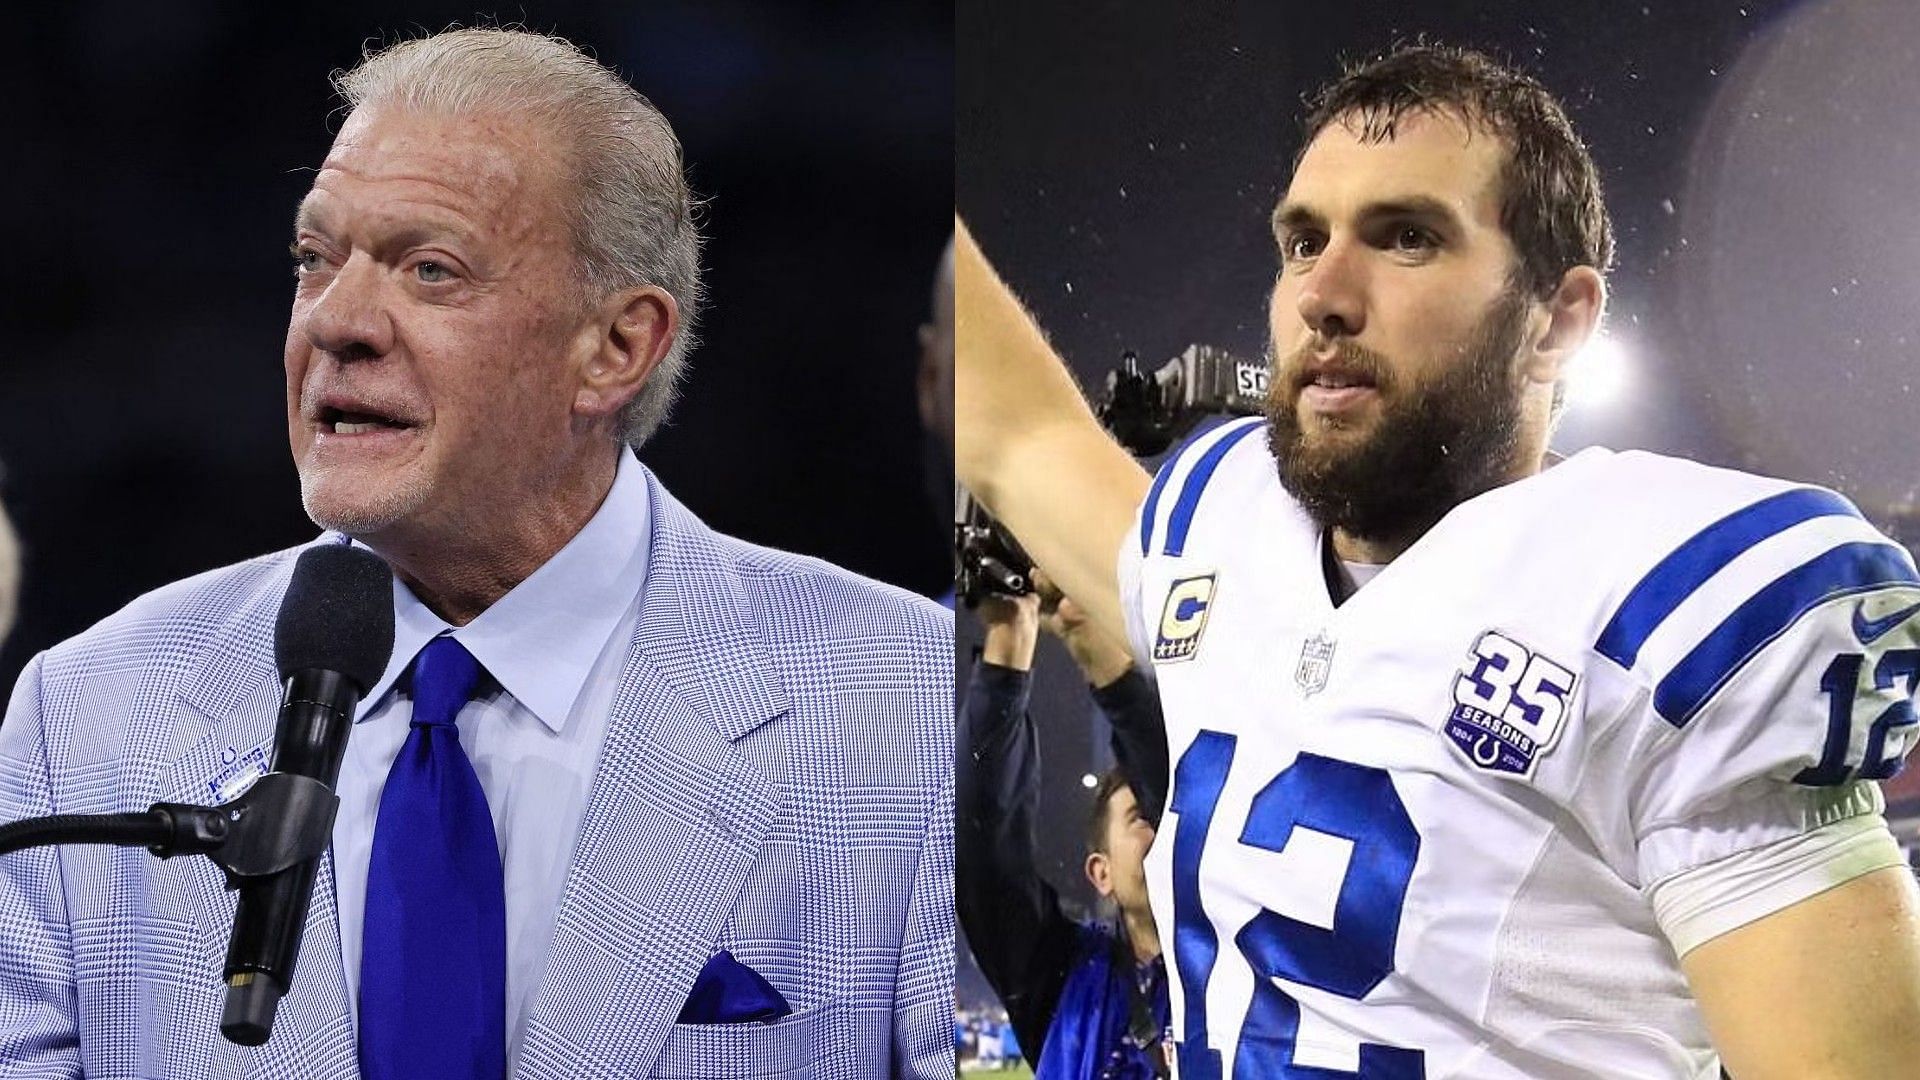 WATCH: Andrew Luck